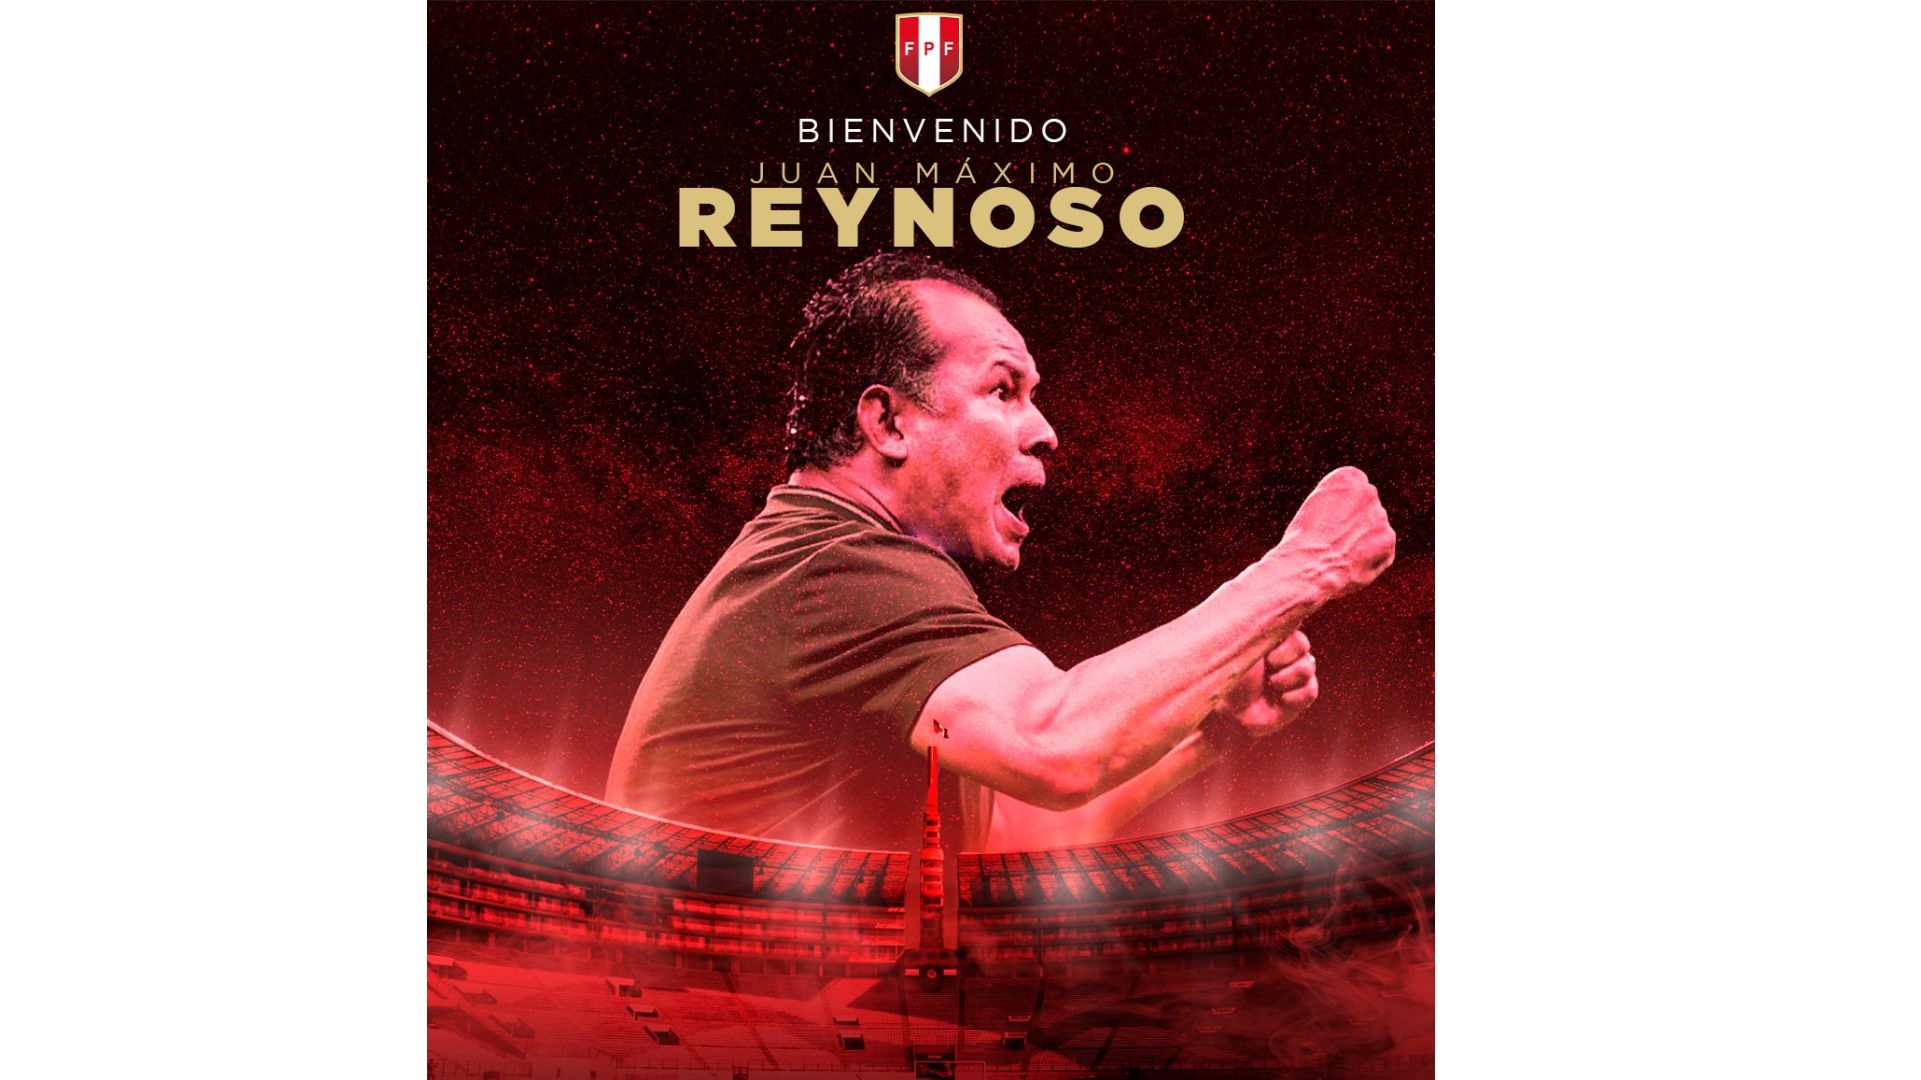 Juan Reynoso is the new coach of the Peruvian national team